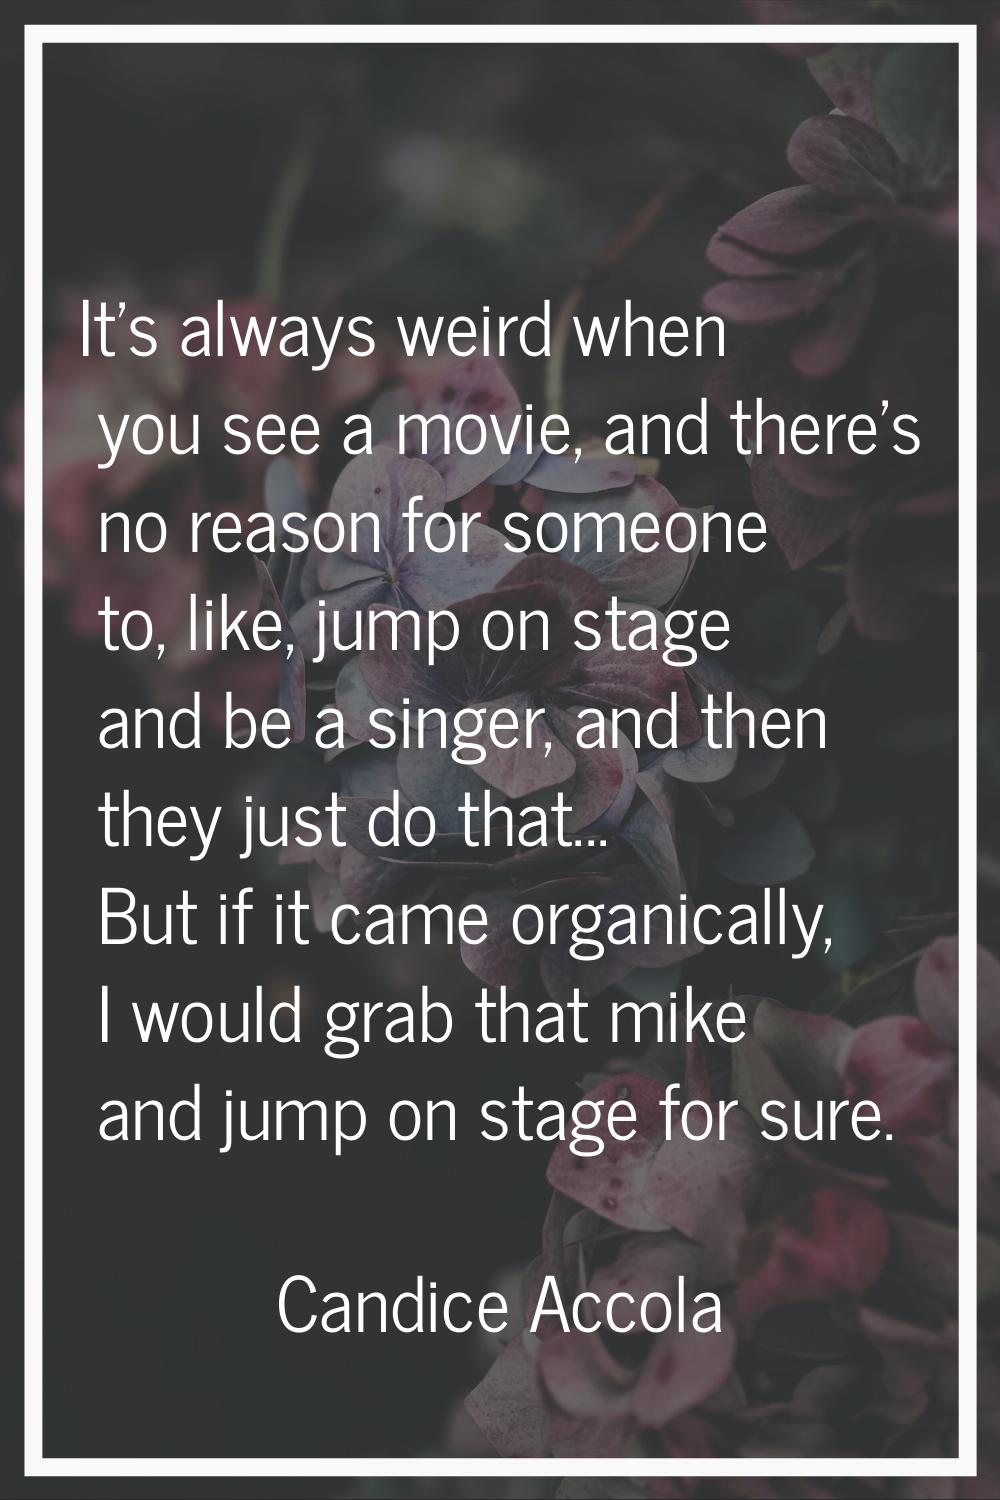 It's always weird when you see a movie, and there's no reason for someone to, like, jump on stage a